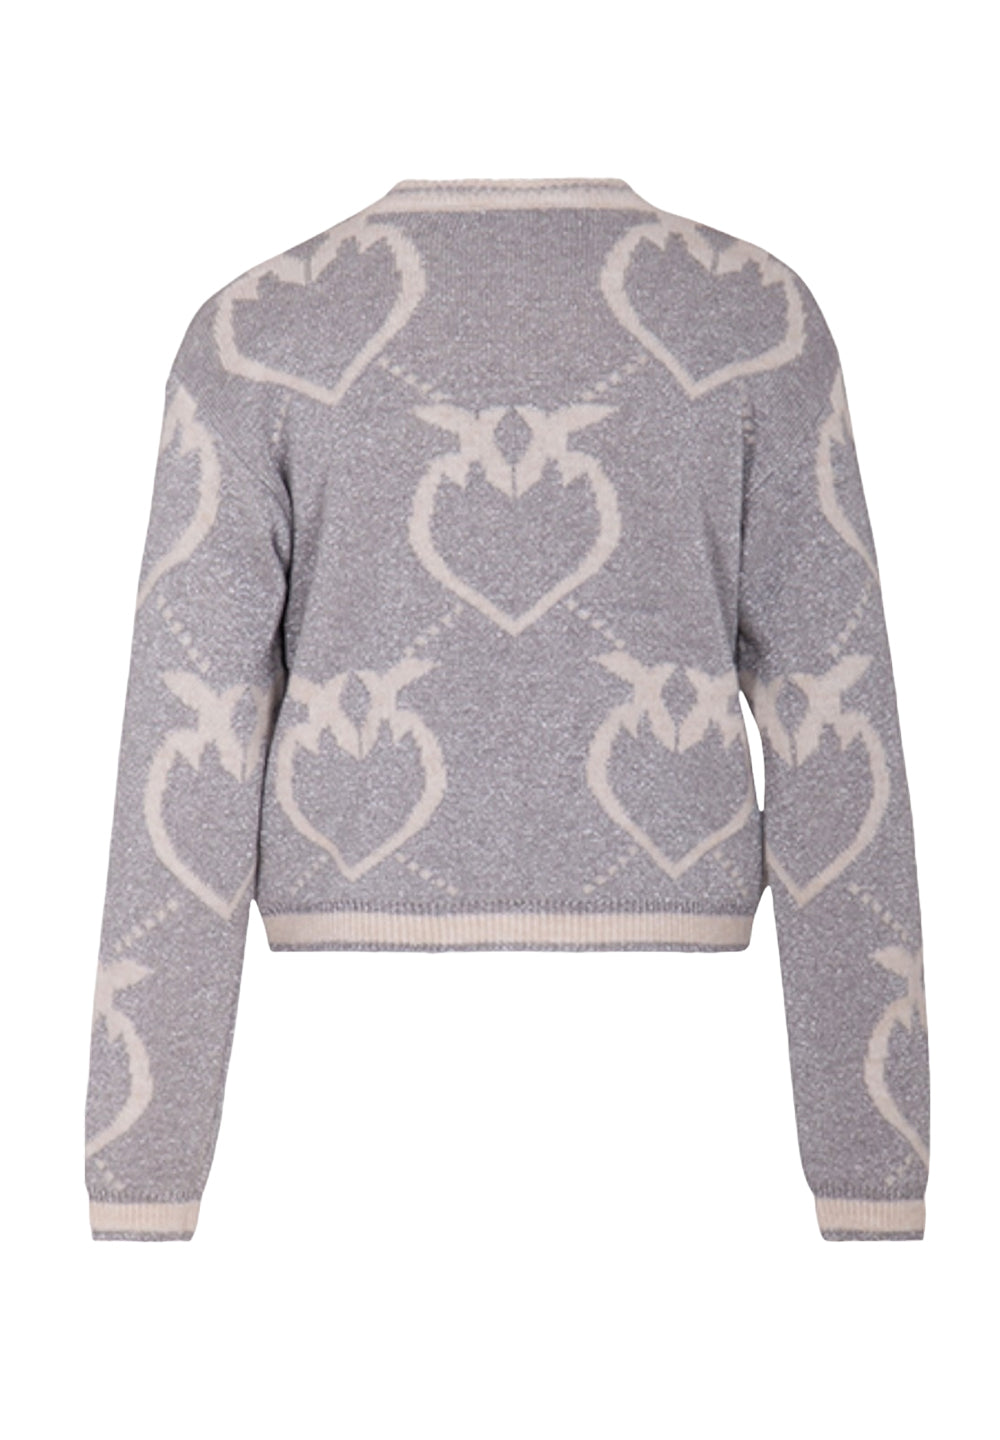 Gray sweater for girls